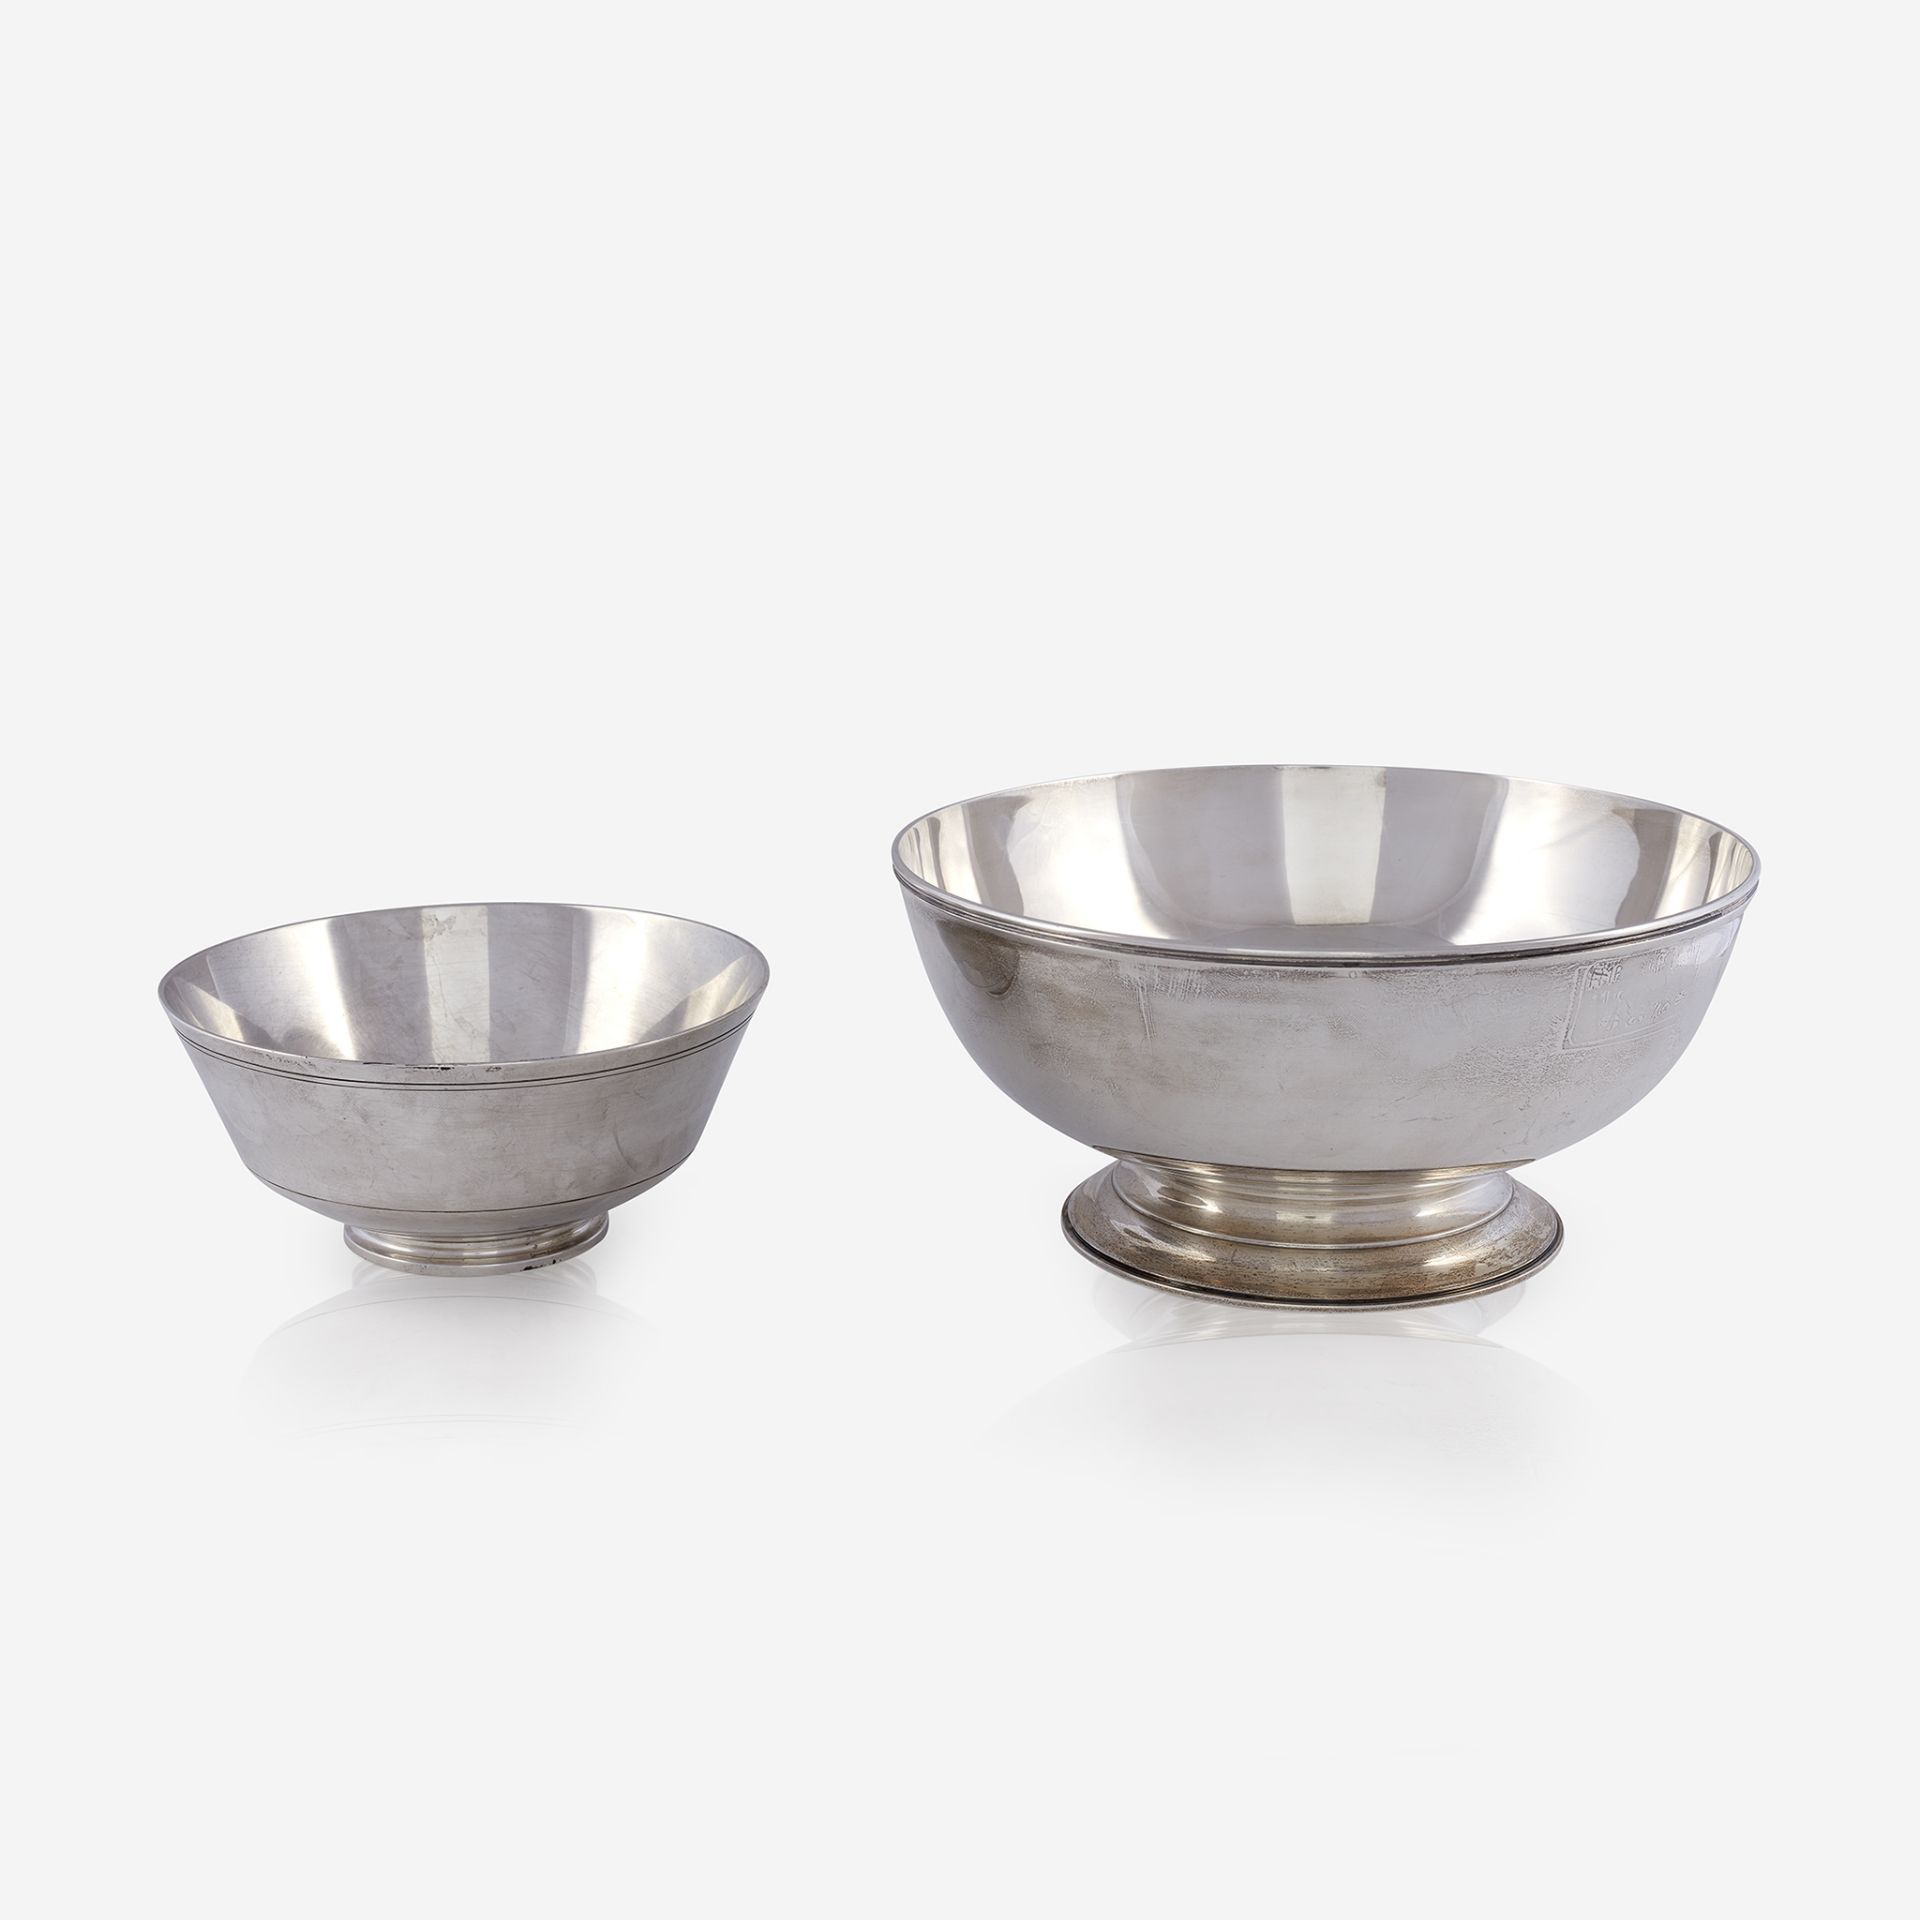 Two American stering silver Revere bowls, Tiffany & Co., New York, 20th century